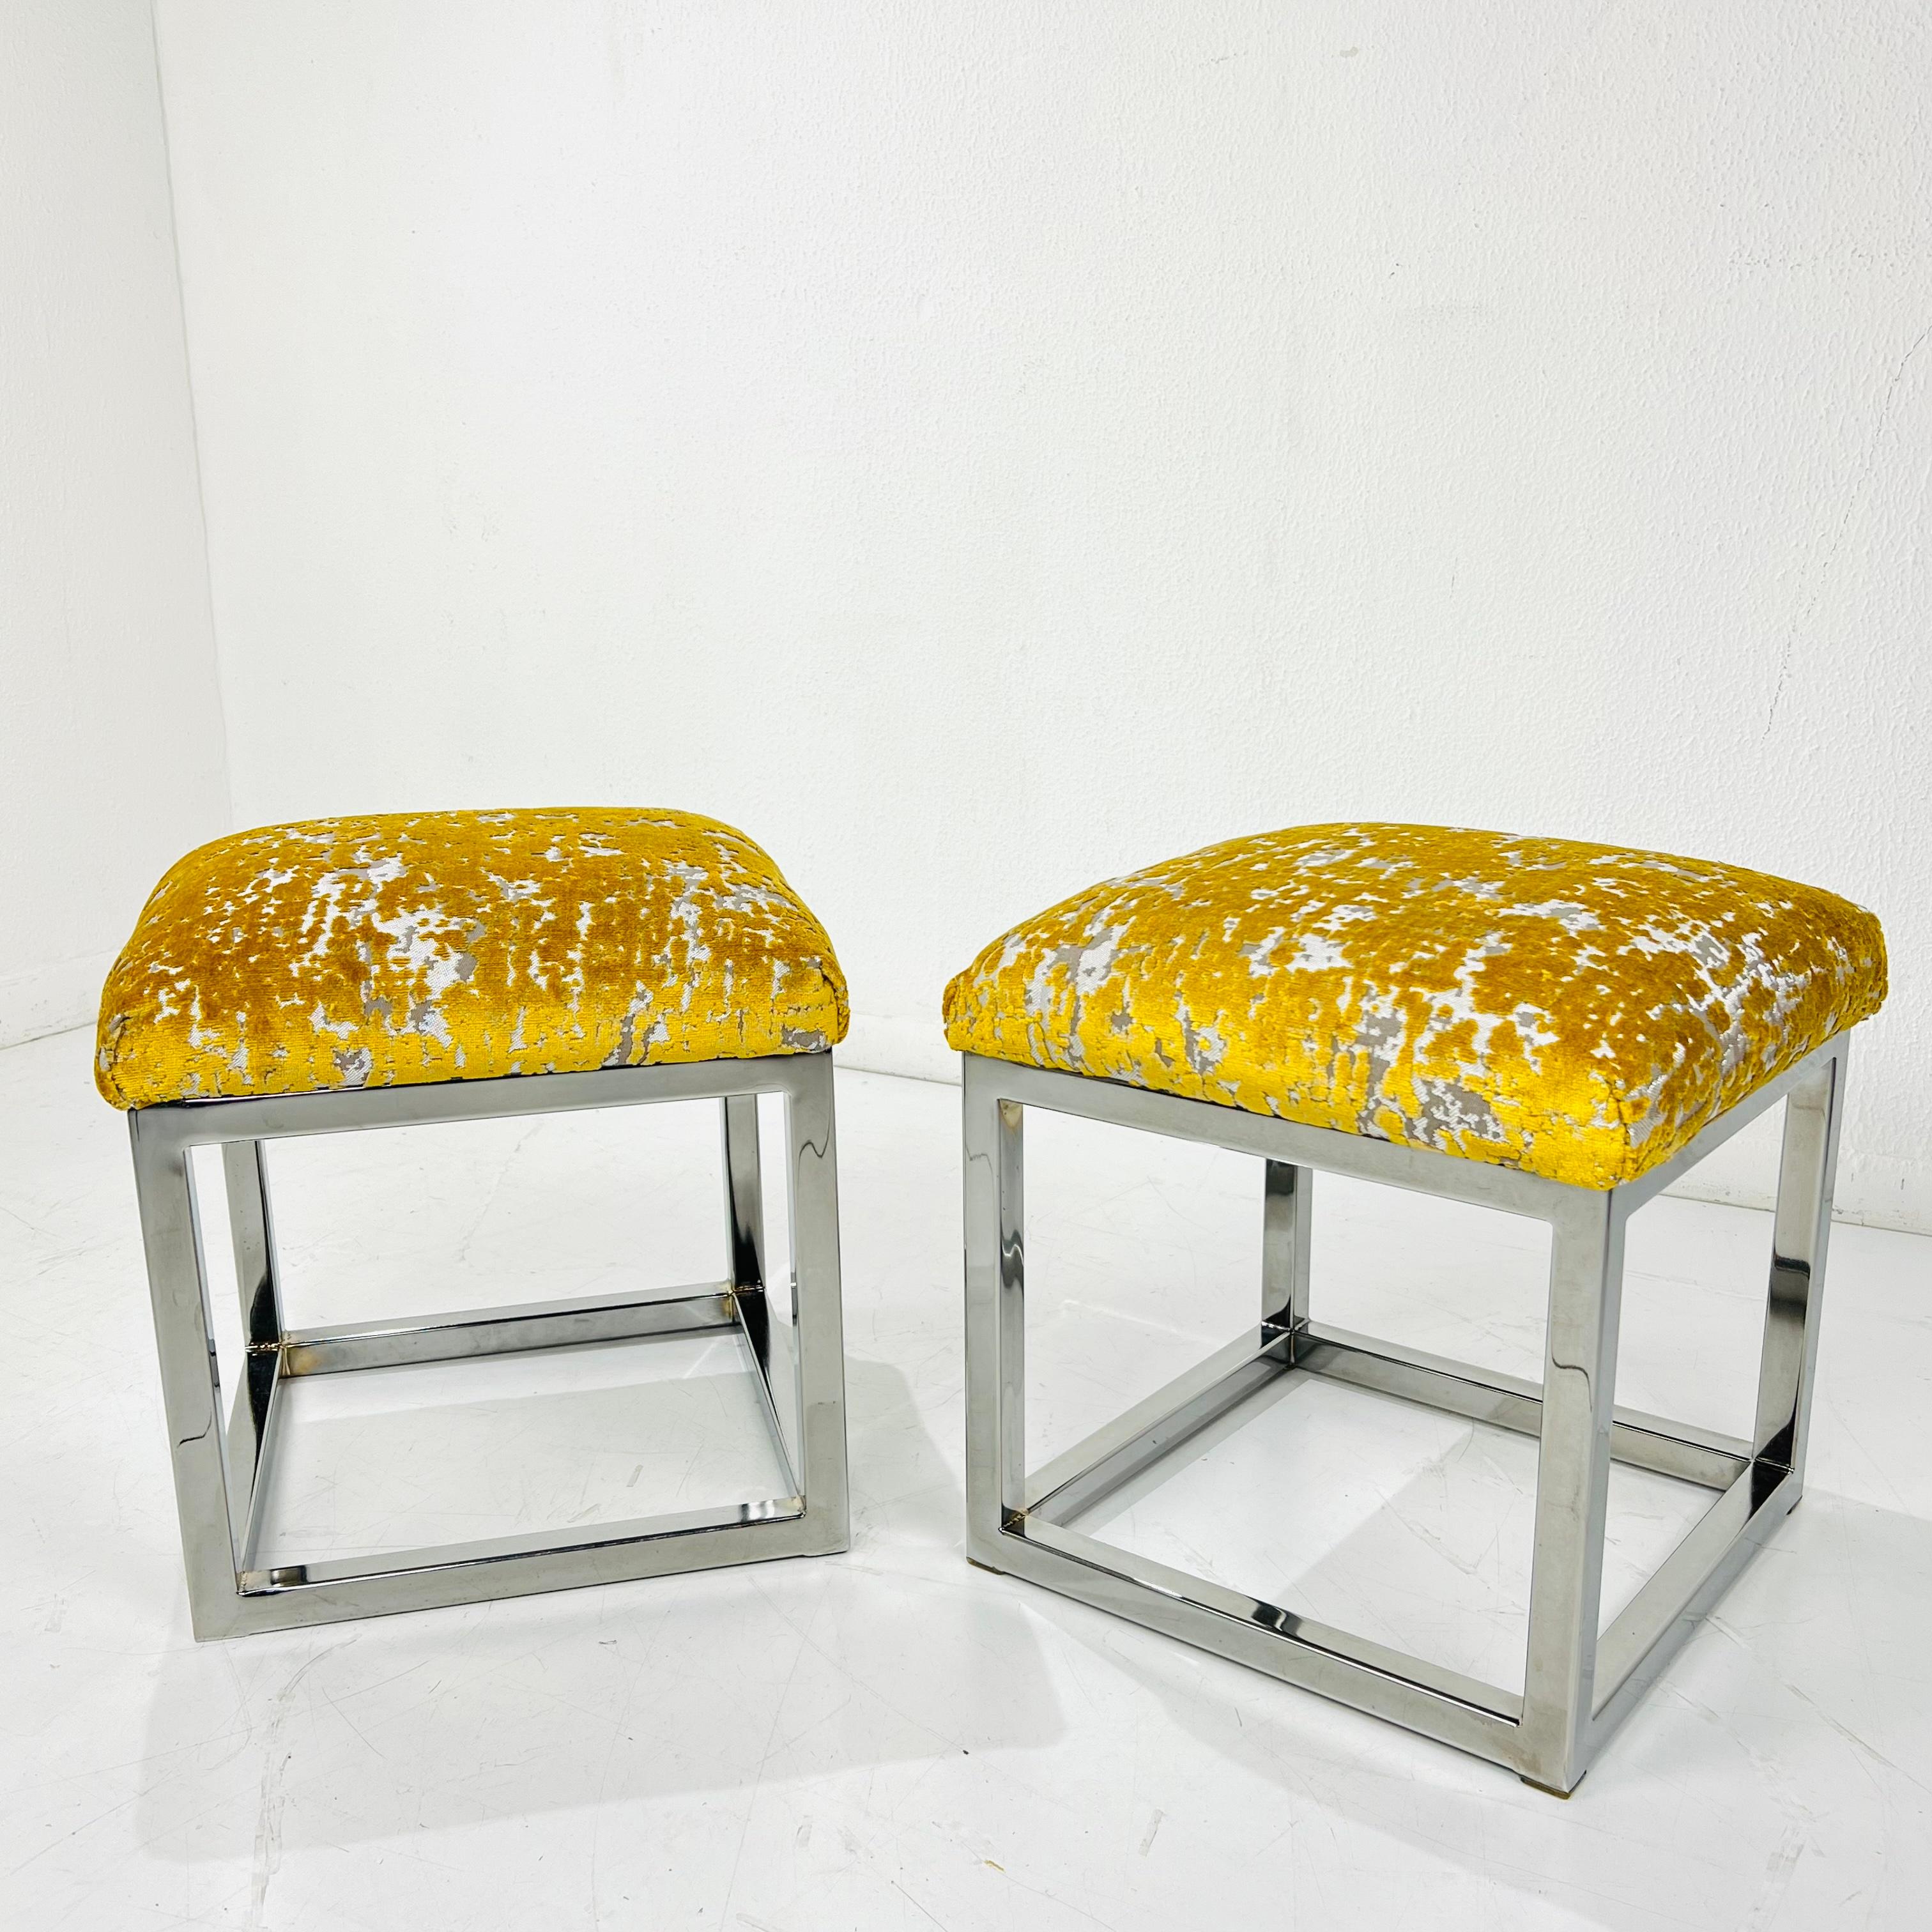 Late 20th Century Pair of Vintage Chrome Frame Footstools / Ottomans For Sale